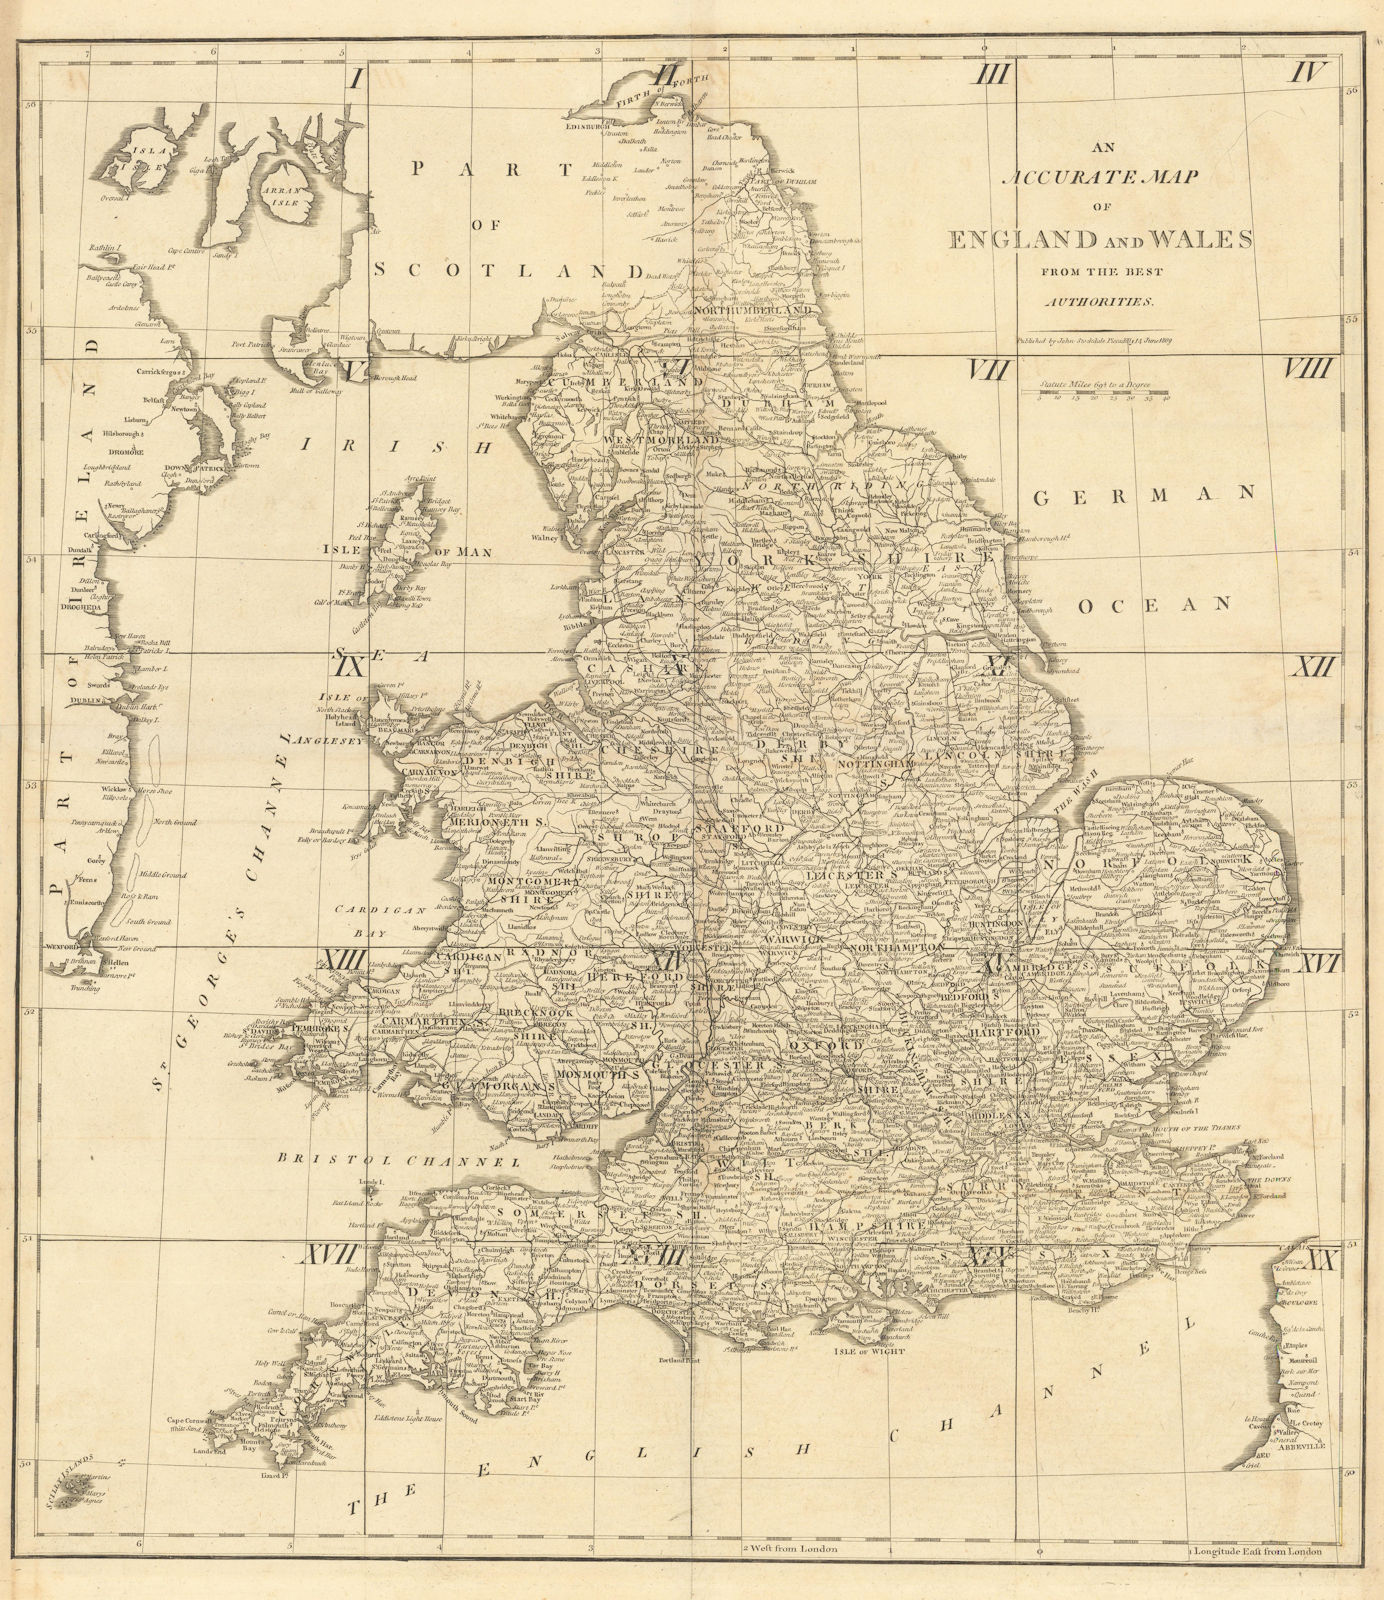 "An accurate map of England and Wales from the best authorities". CARY 1806